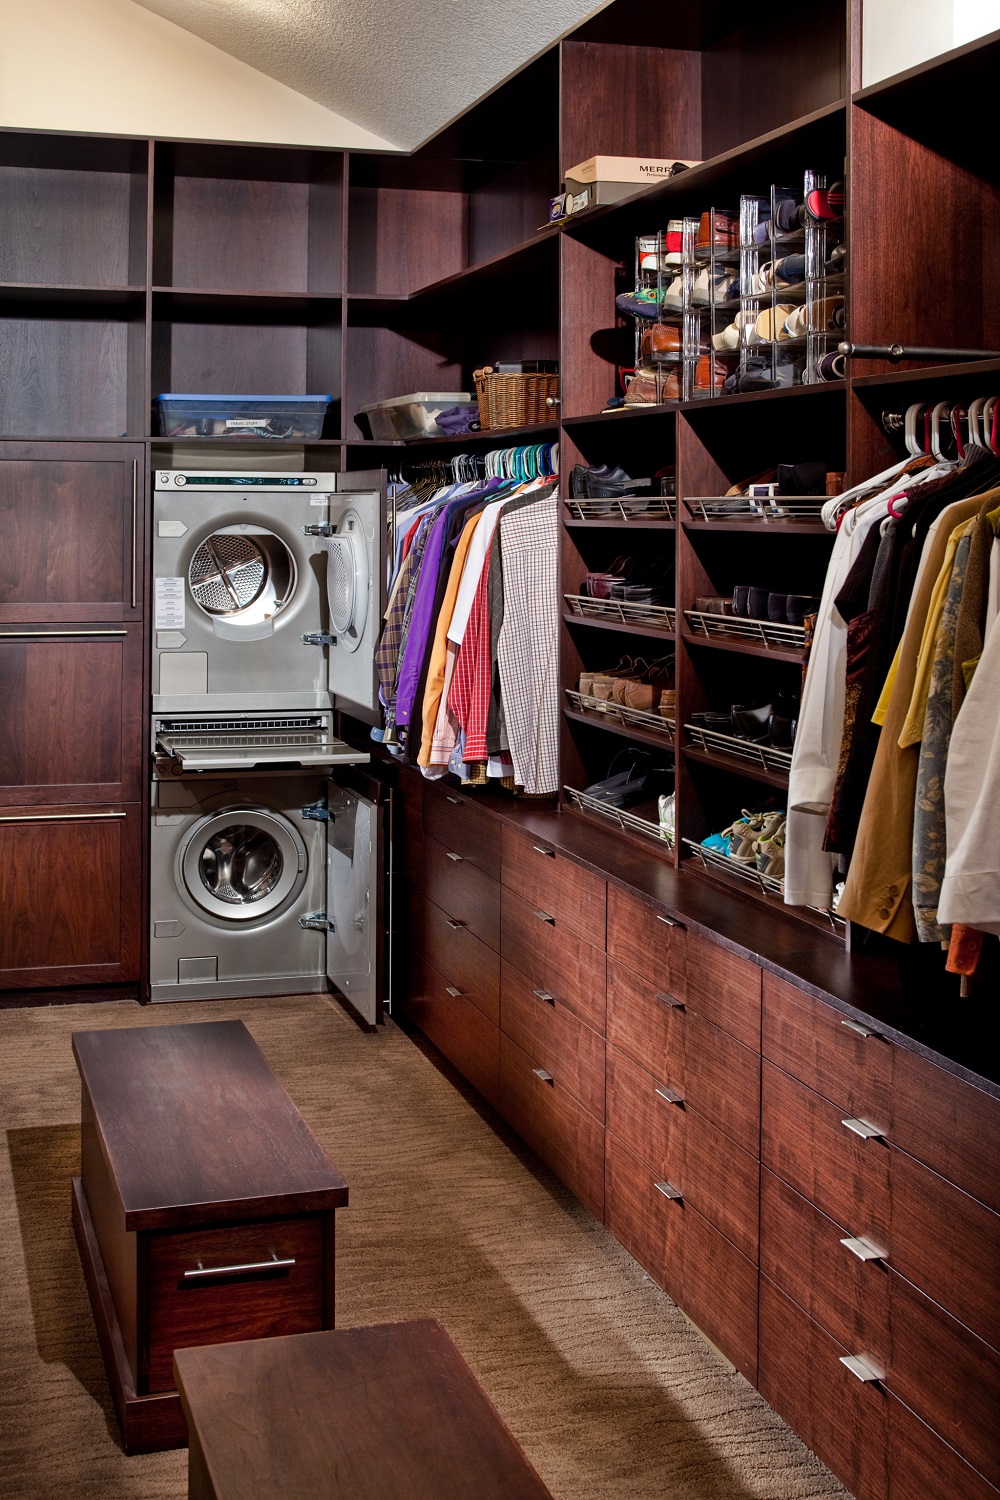 wc12 Cool walk-in closet ideas you should have in your home